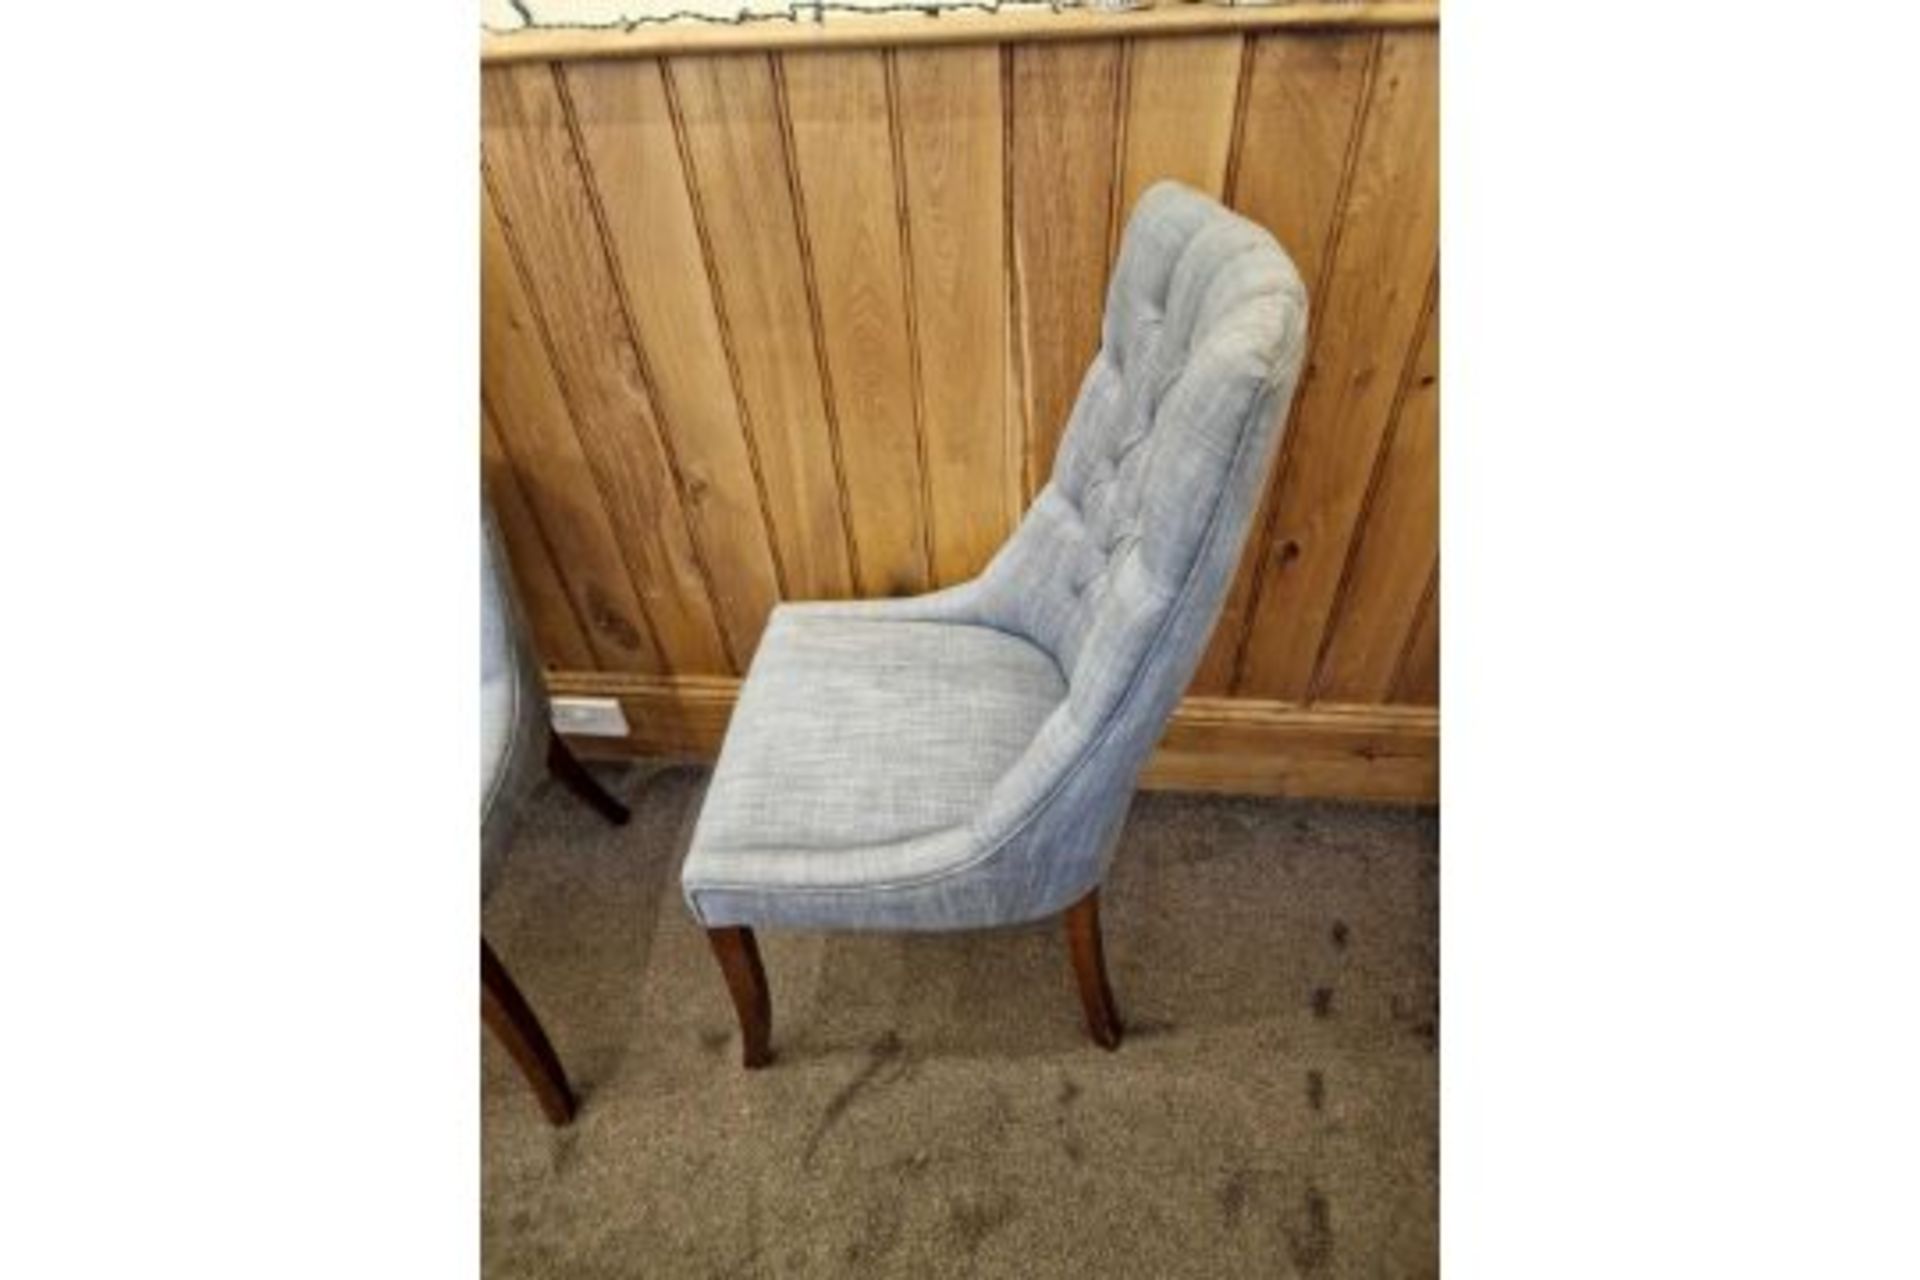 A Pair Of Bourne Furniture Sing Dining Chair Solid Timber Tufted Back Dining Chair Upholstered In - Image 3 of 4